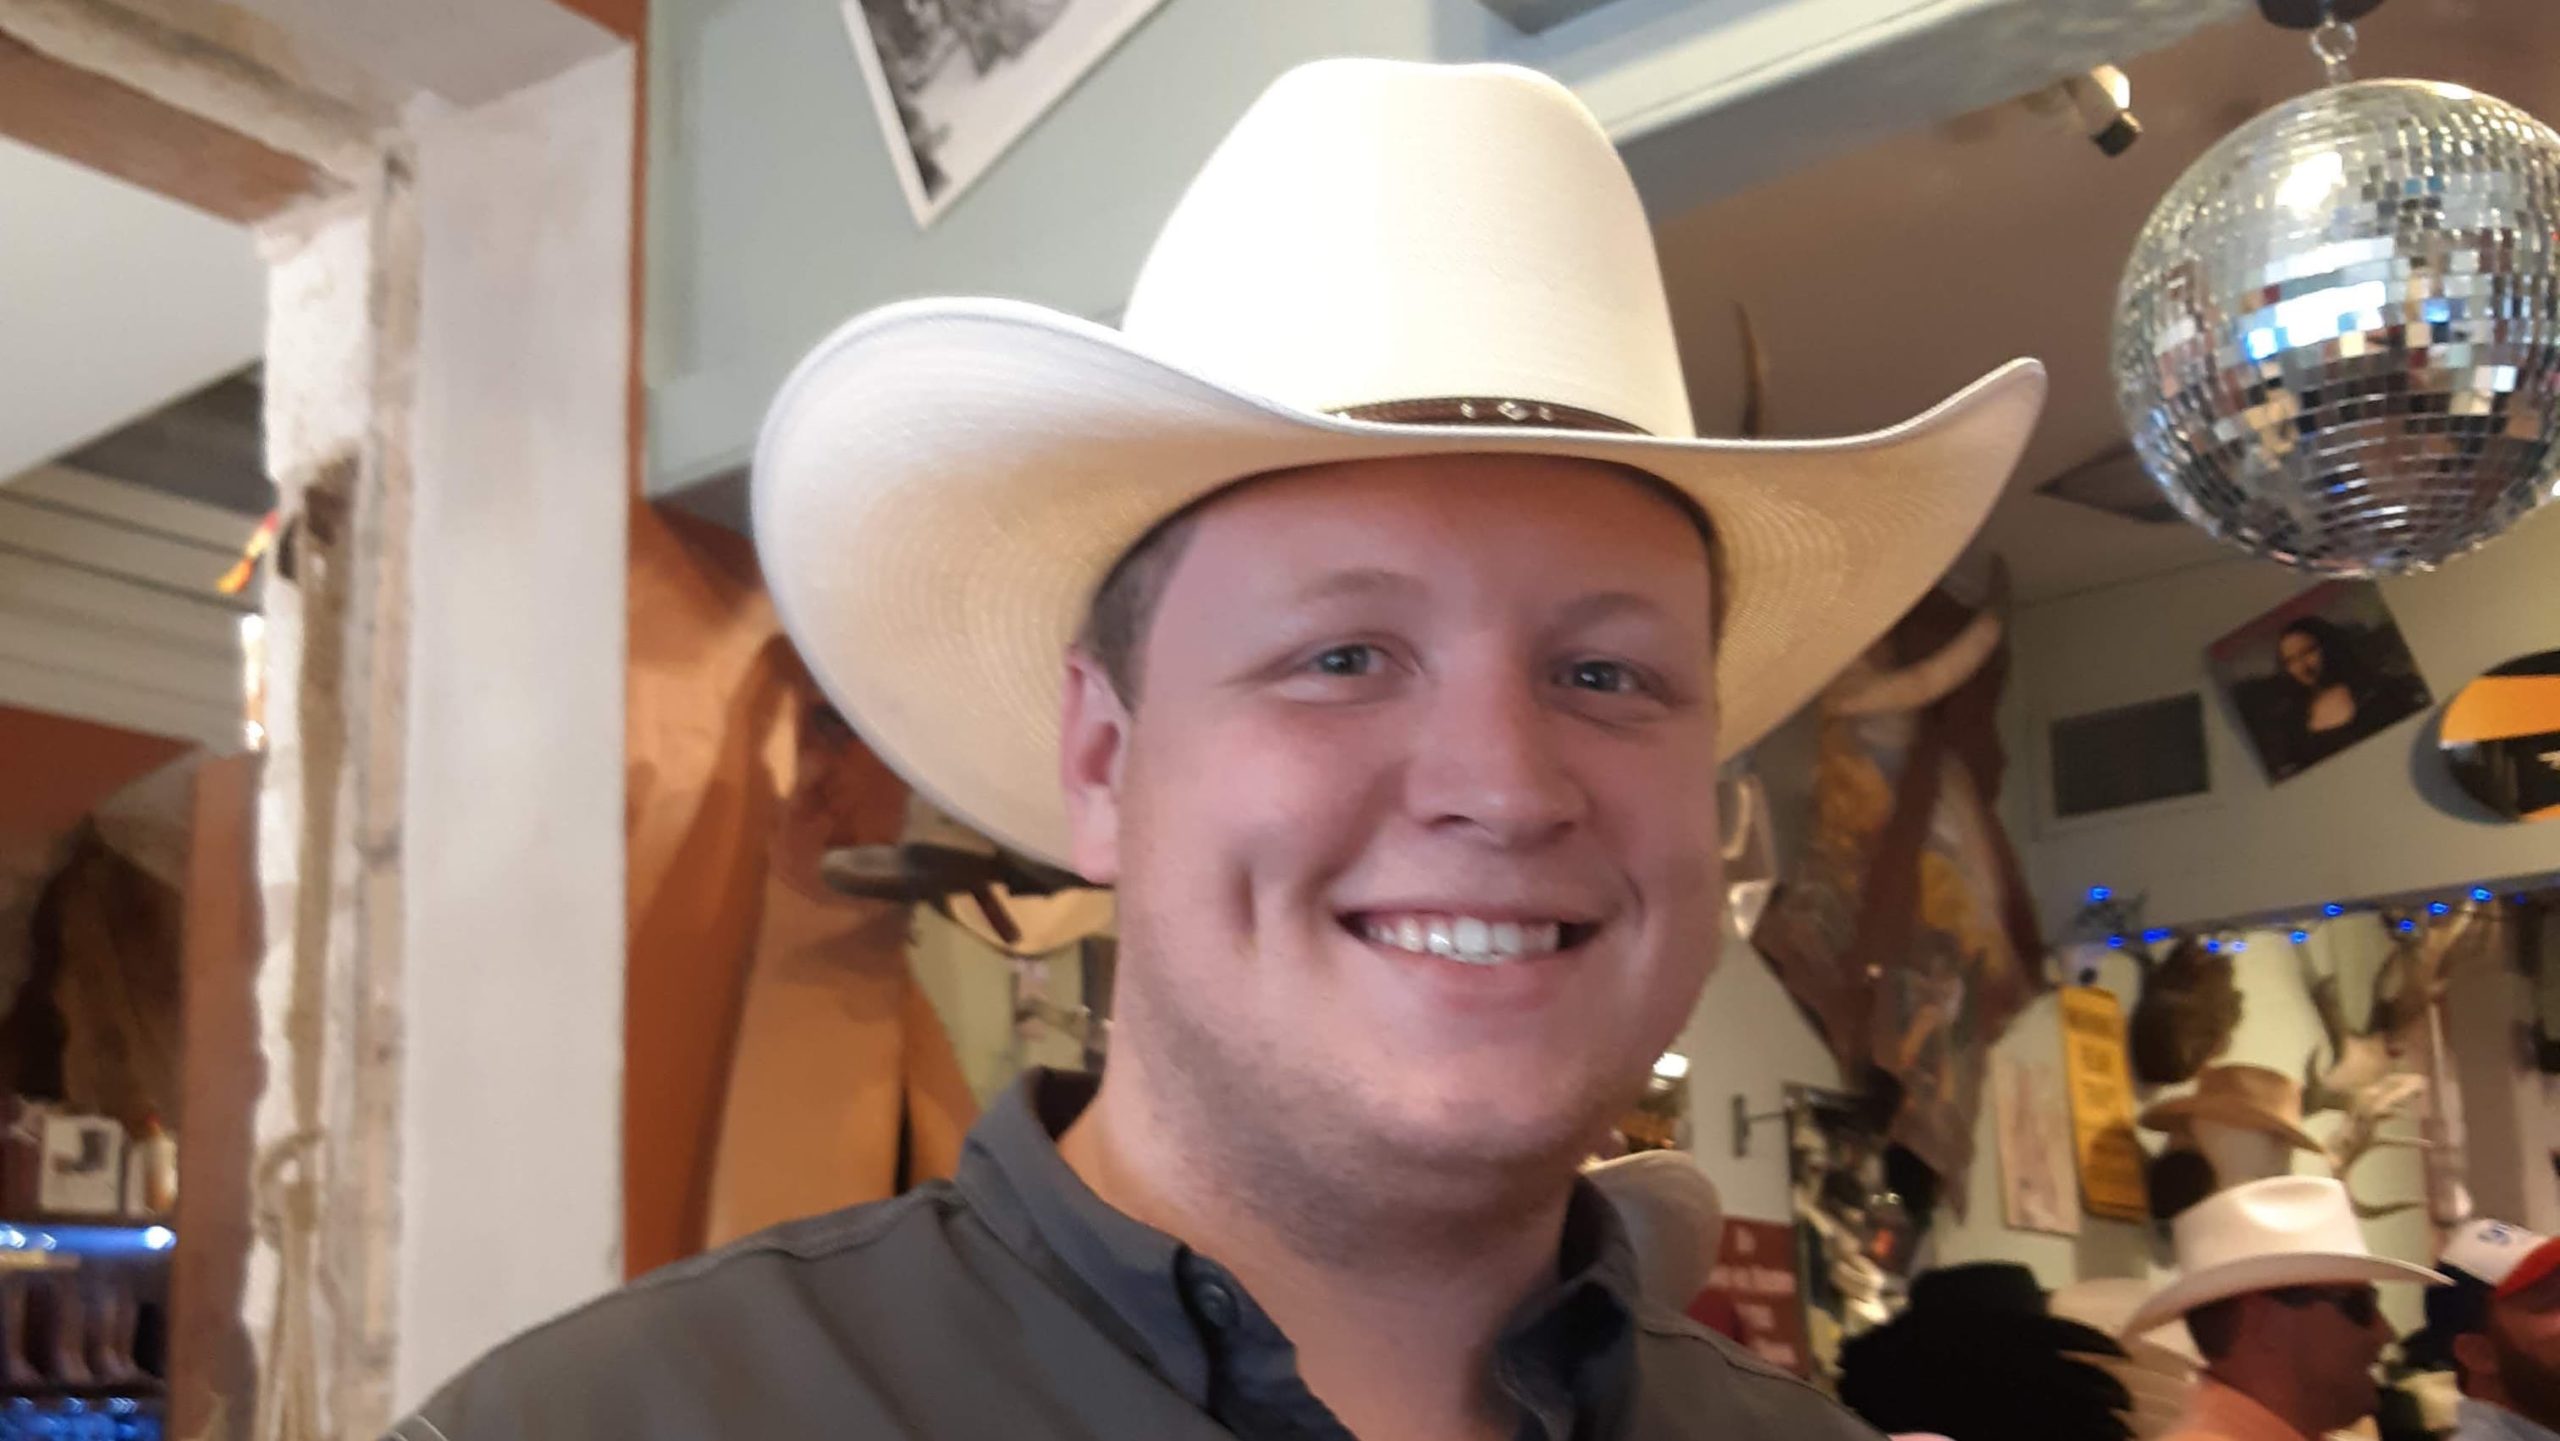 Ben Mohorc wears a cowboy hat, as one does when in Texas.